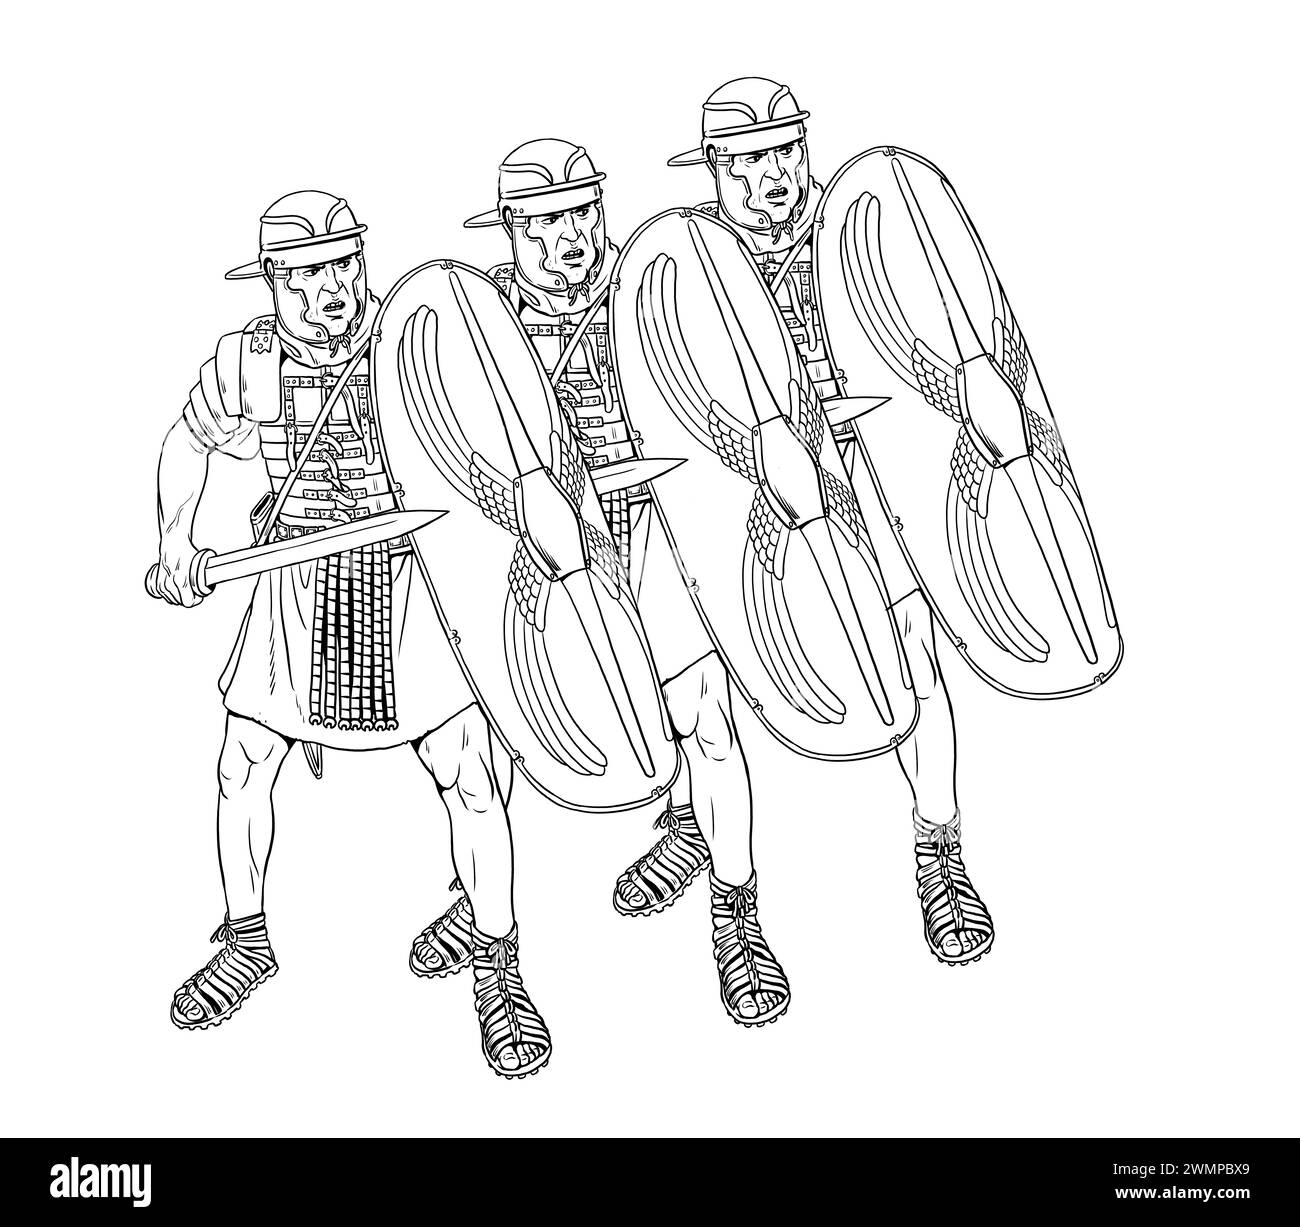 Attack of the Roman legionaries. Ancient battle. Historical drawing. Stock Photo